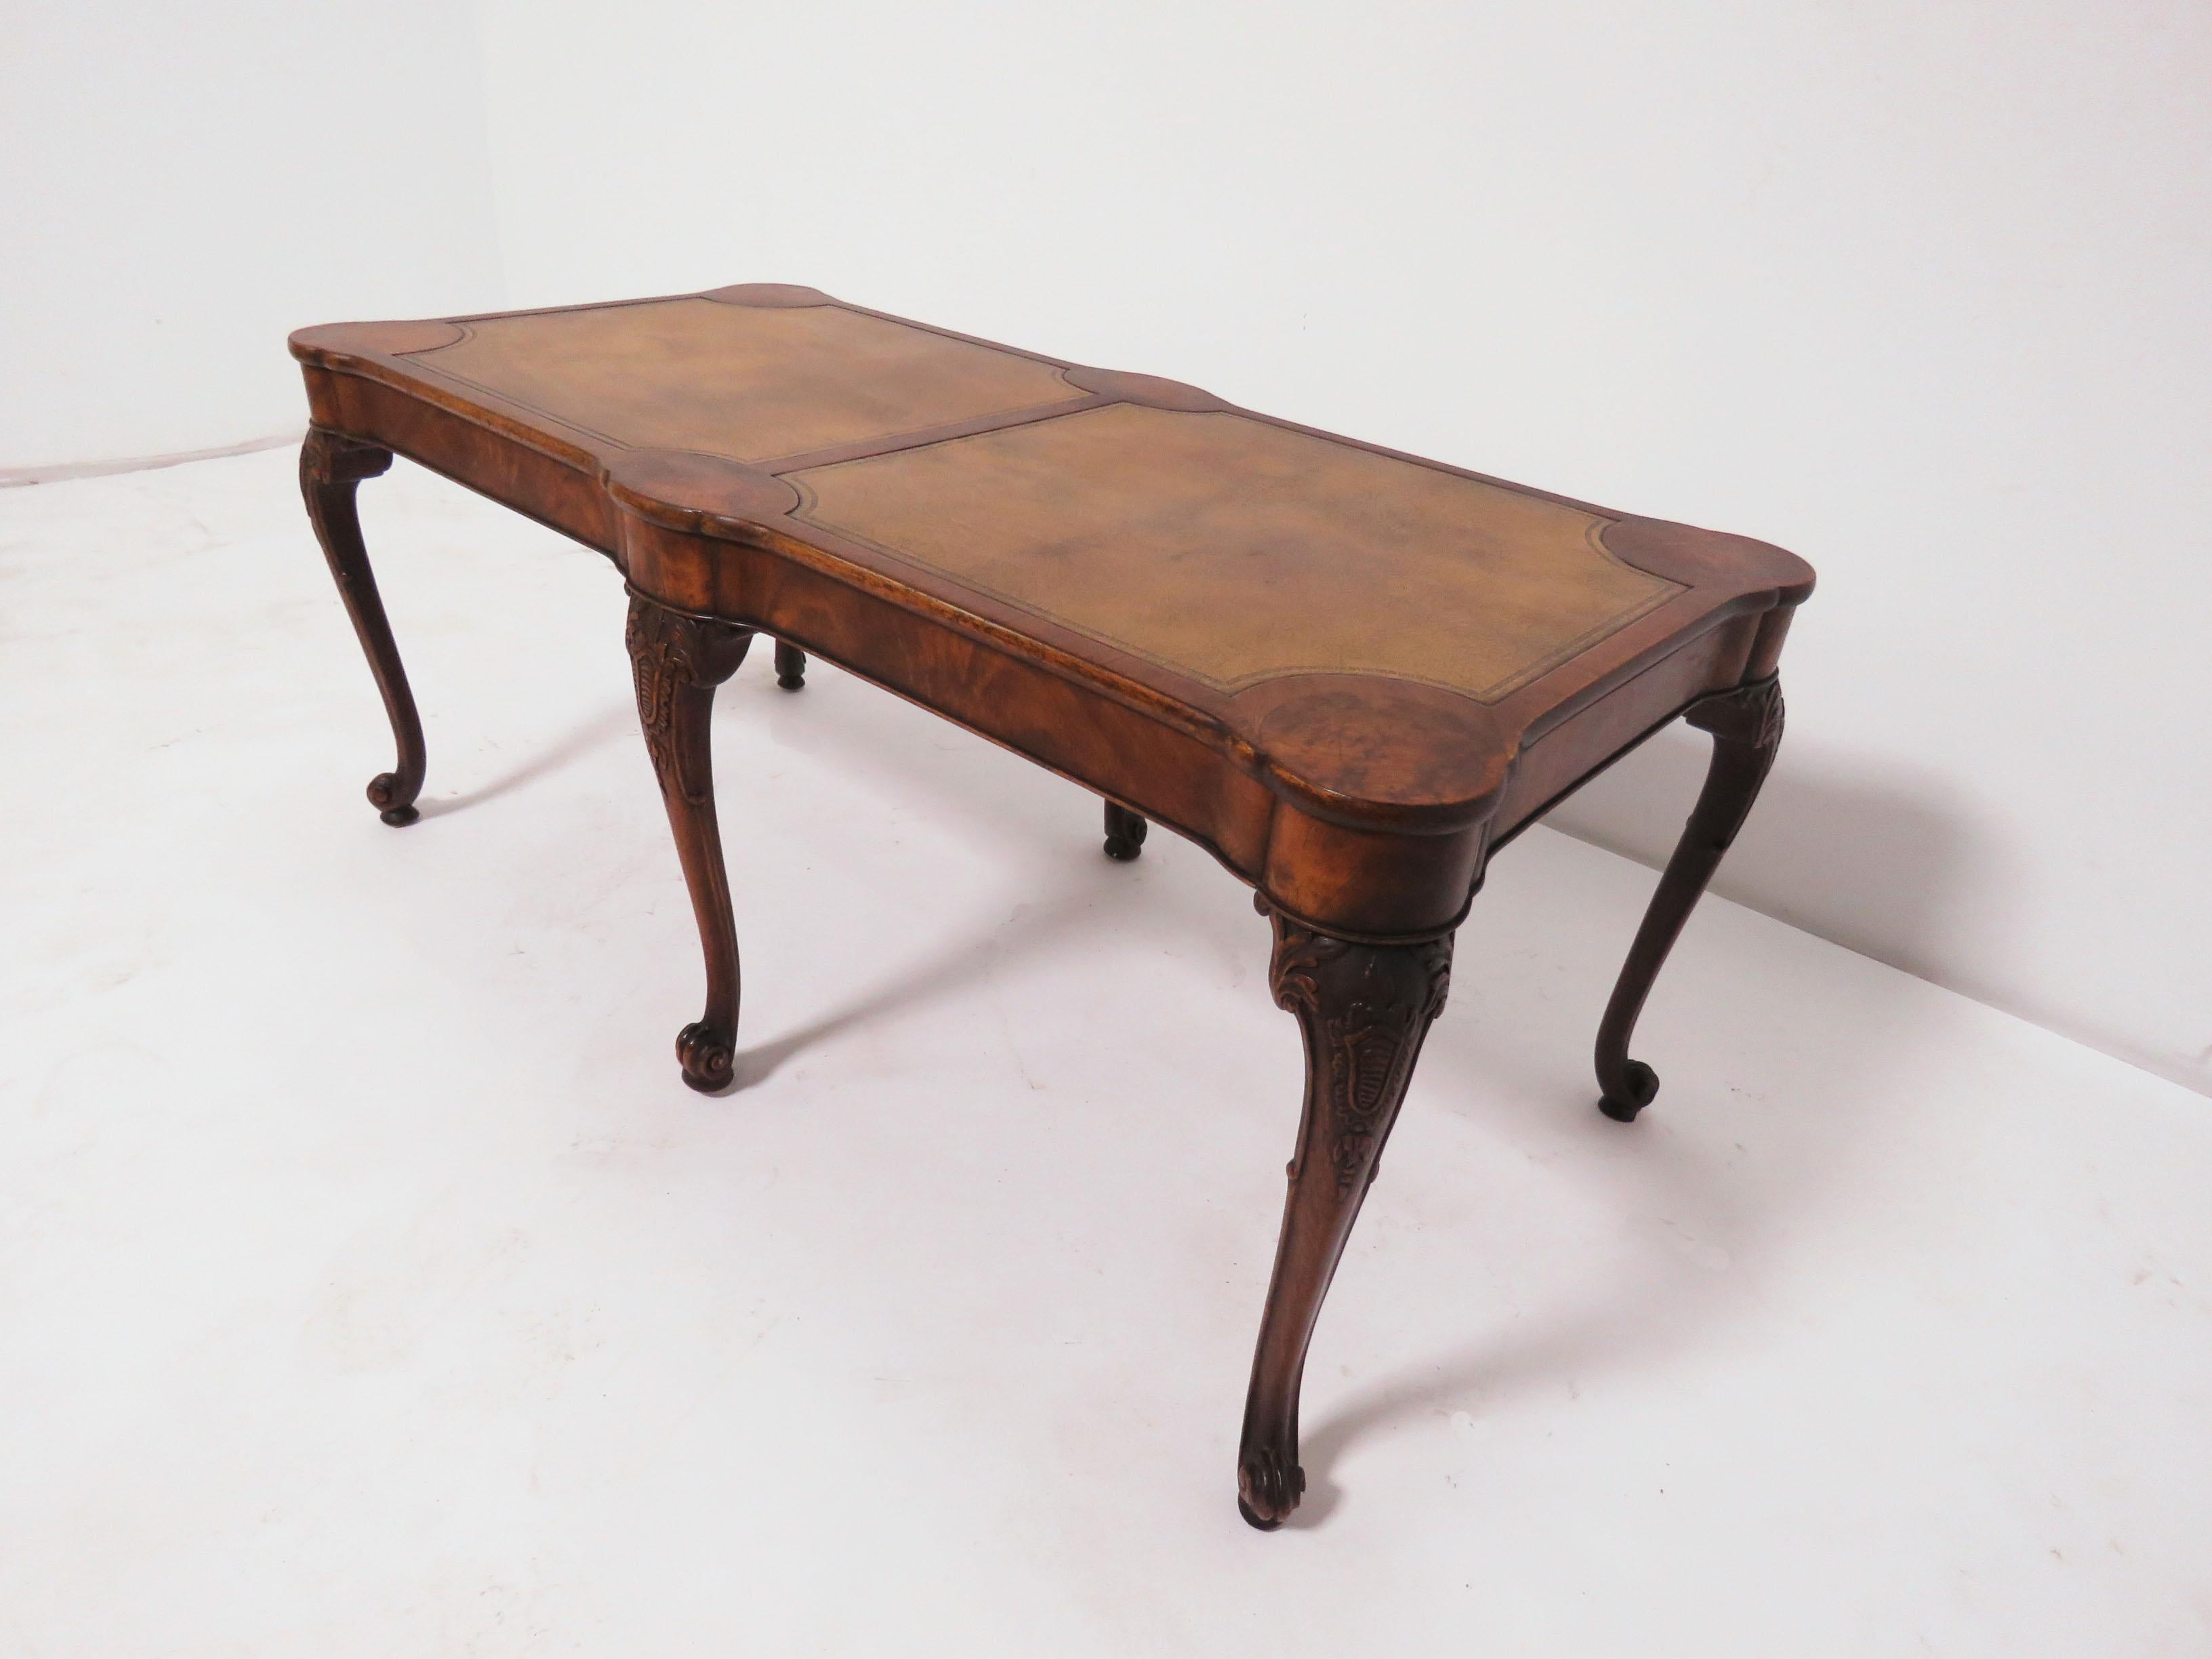 A Georgian style hand carved burr walnut coffee table with embossed leather top, by Charak of Boston, dated 1937.